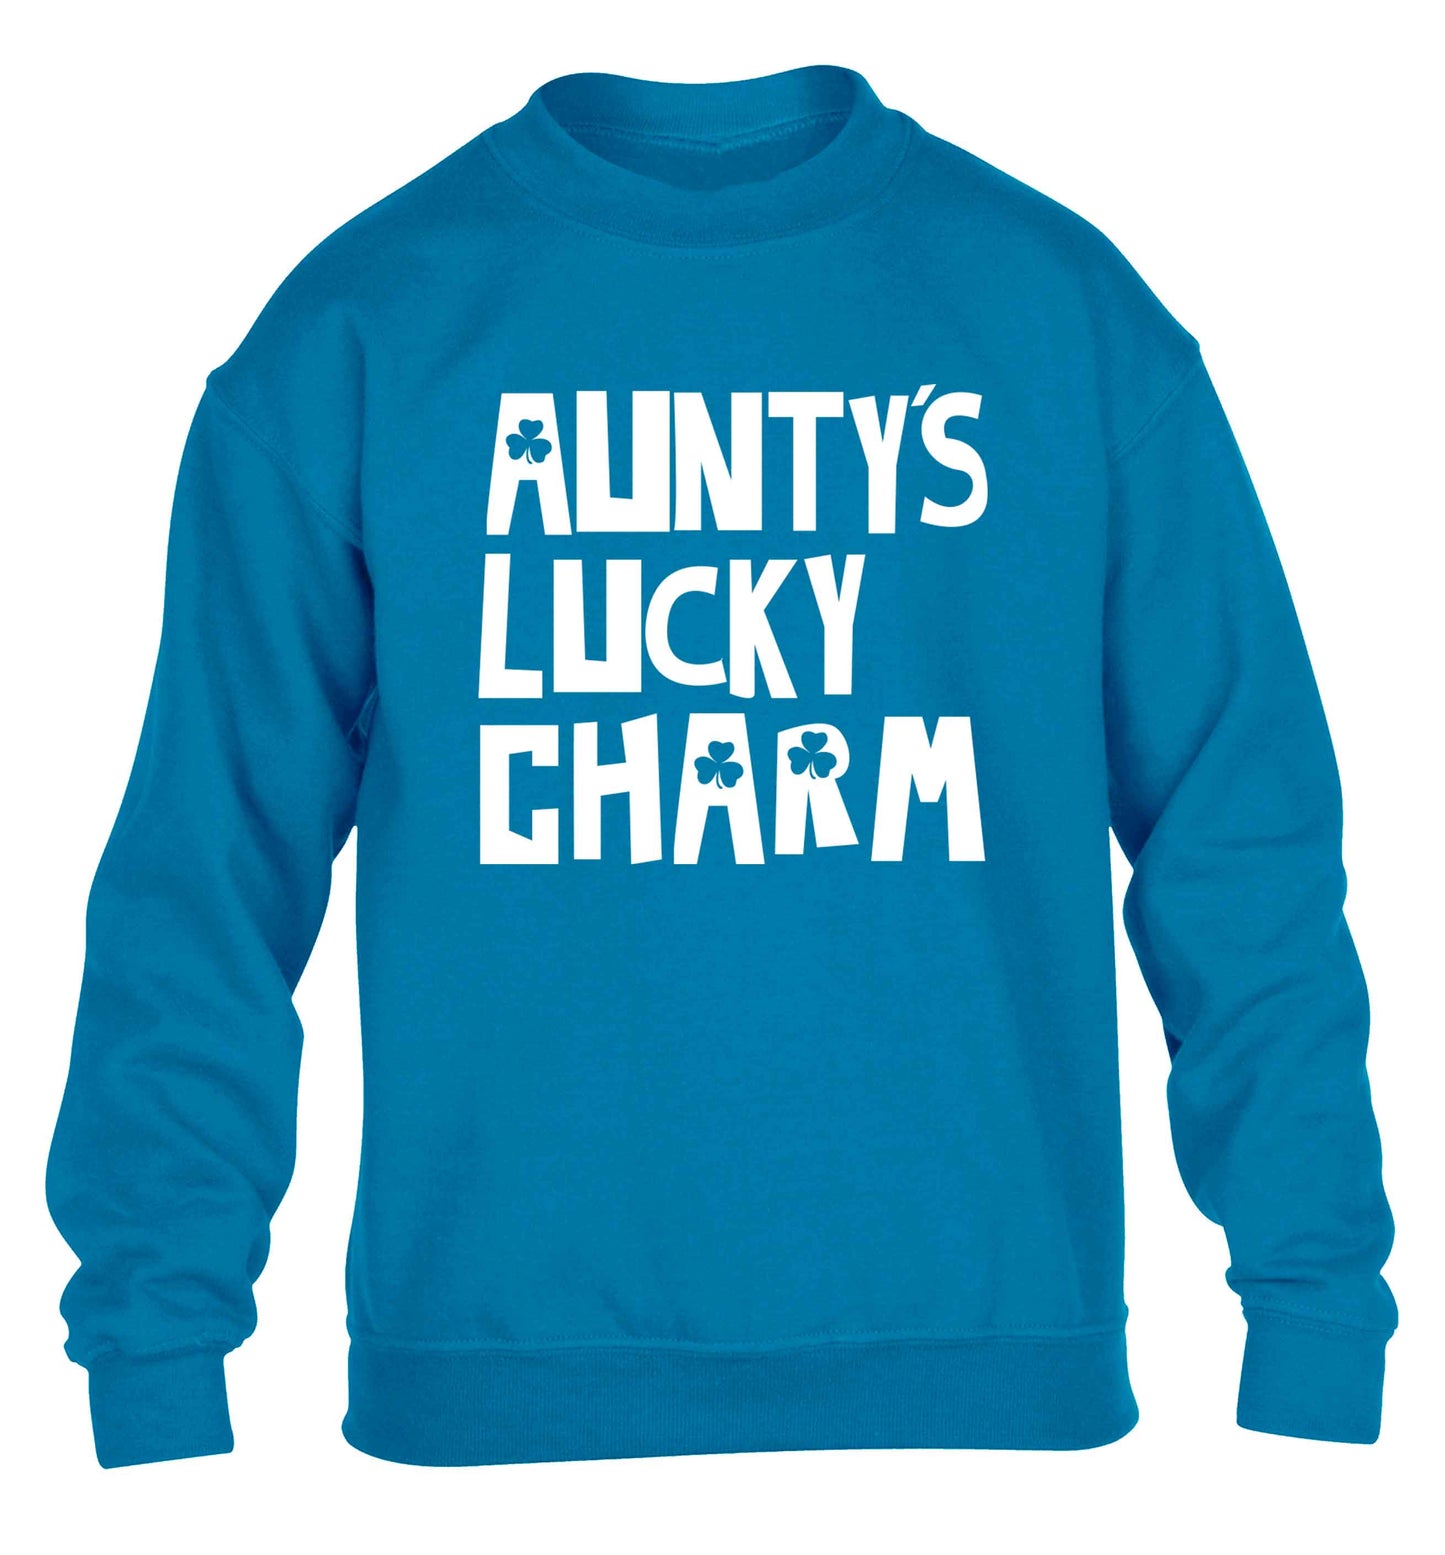 Aunty's lucky charm children's blue sweater 12-13 Years